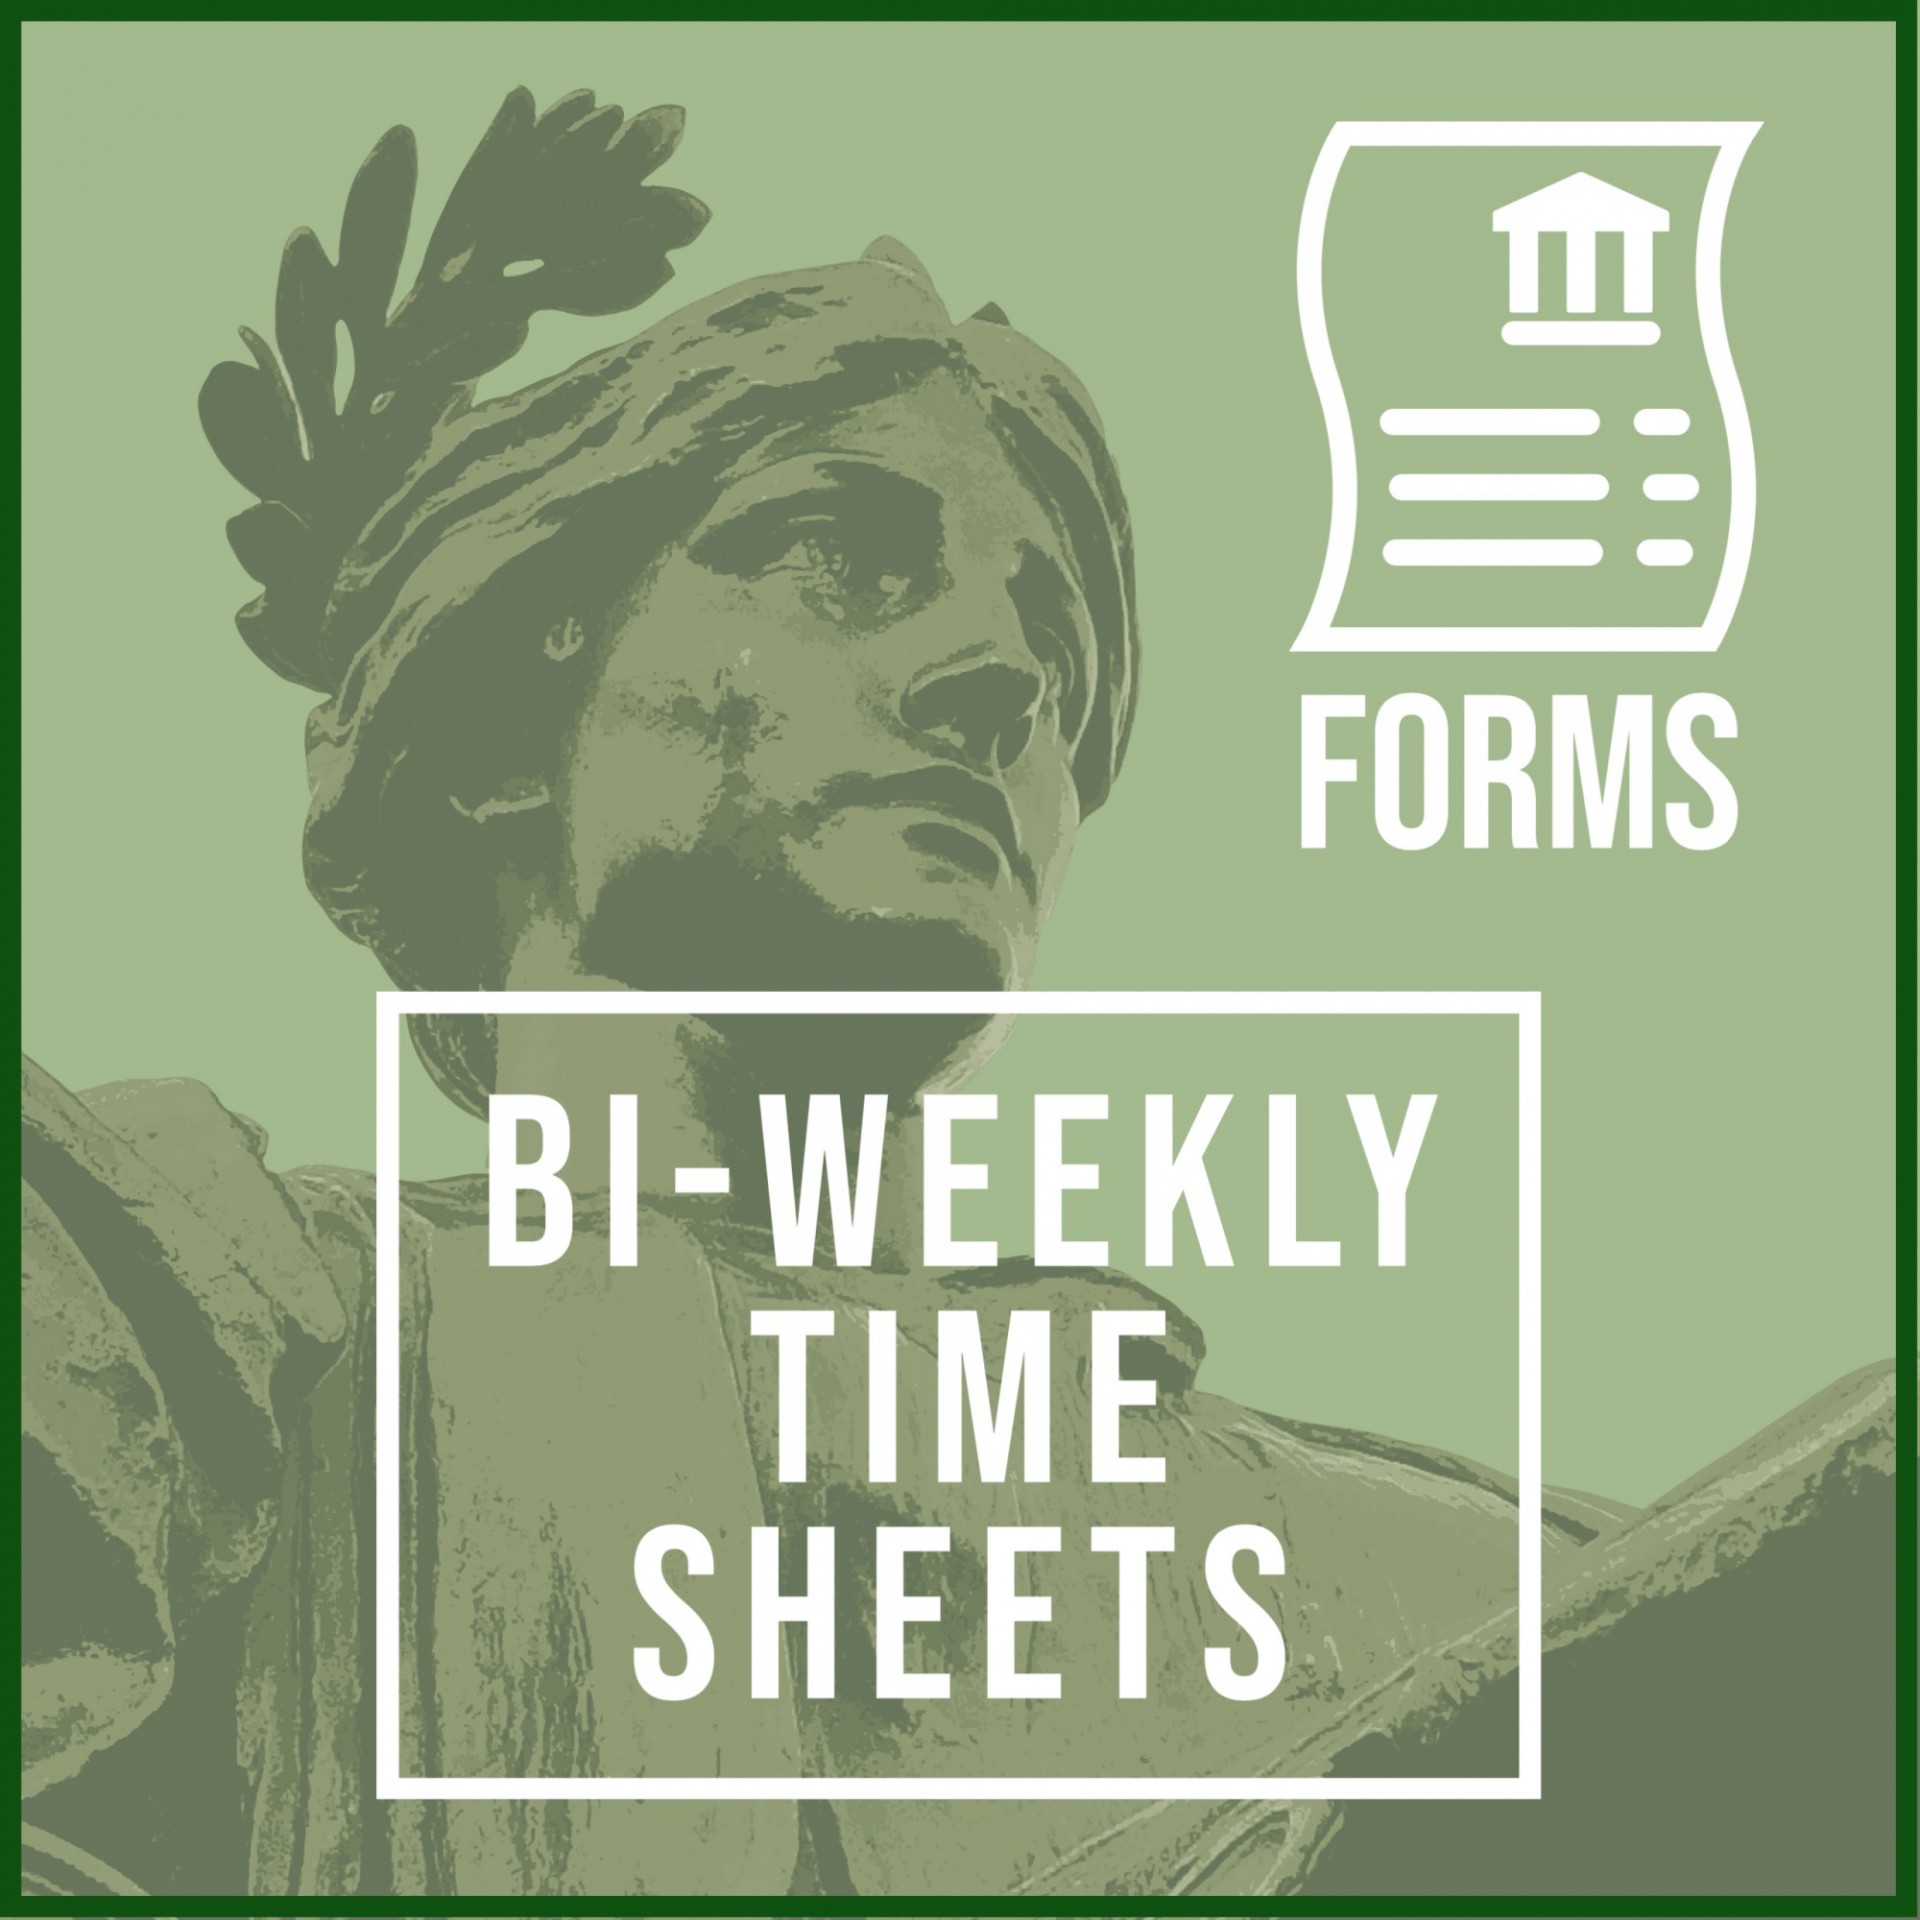 Forms Icon: Bi-Weekly Time Sheets